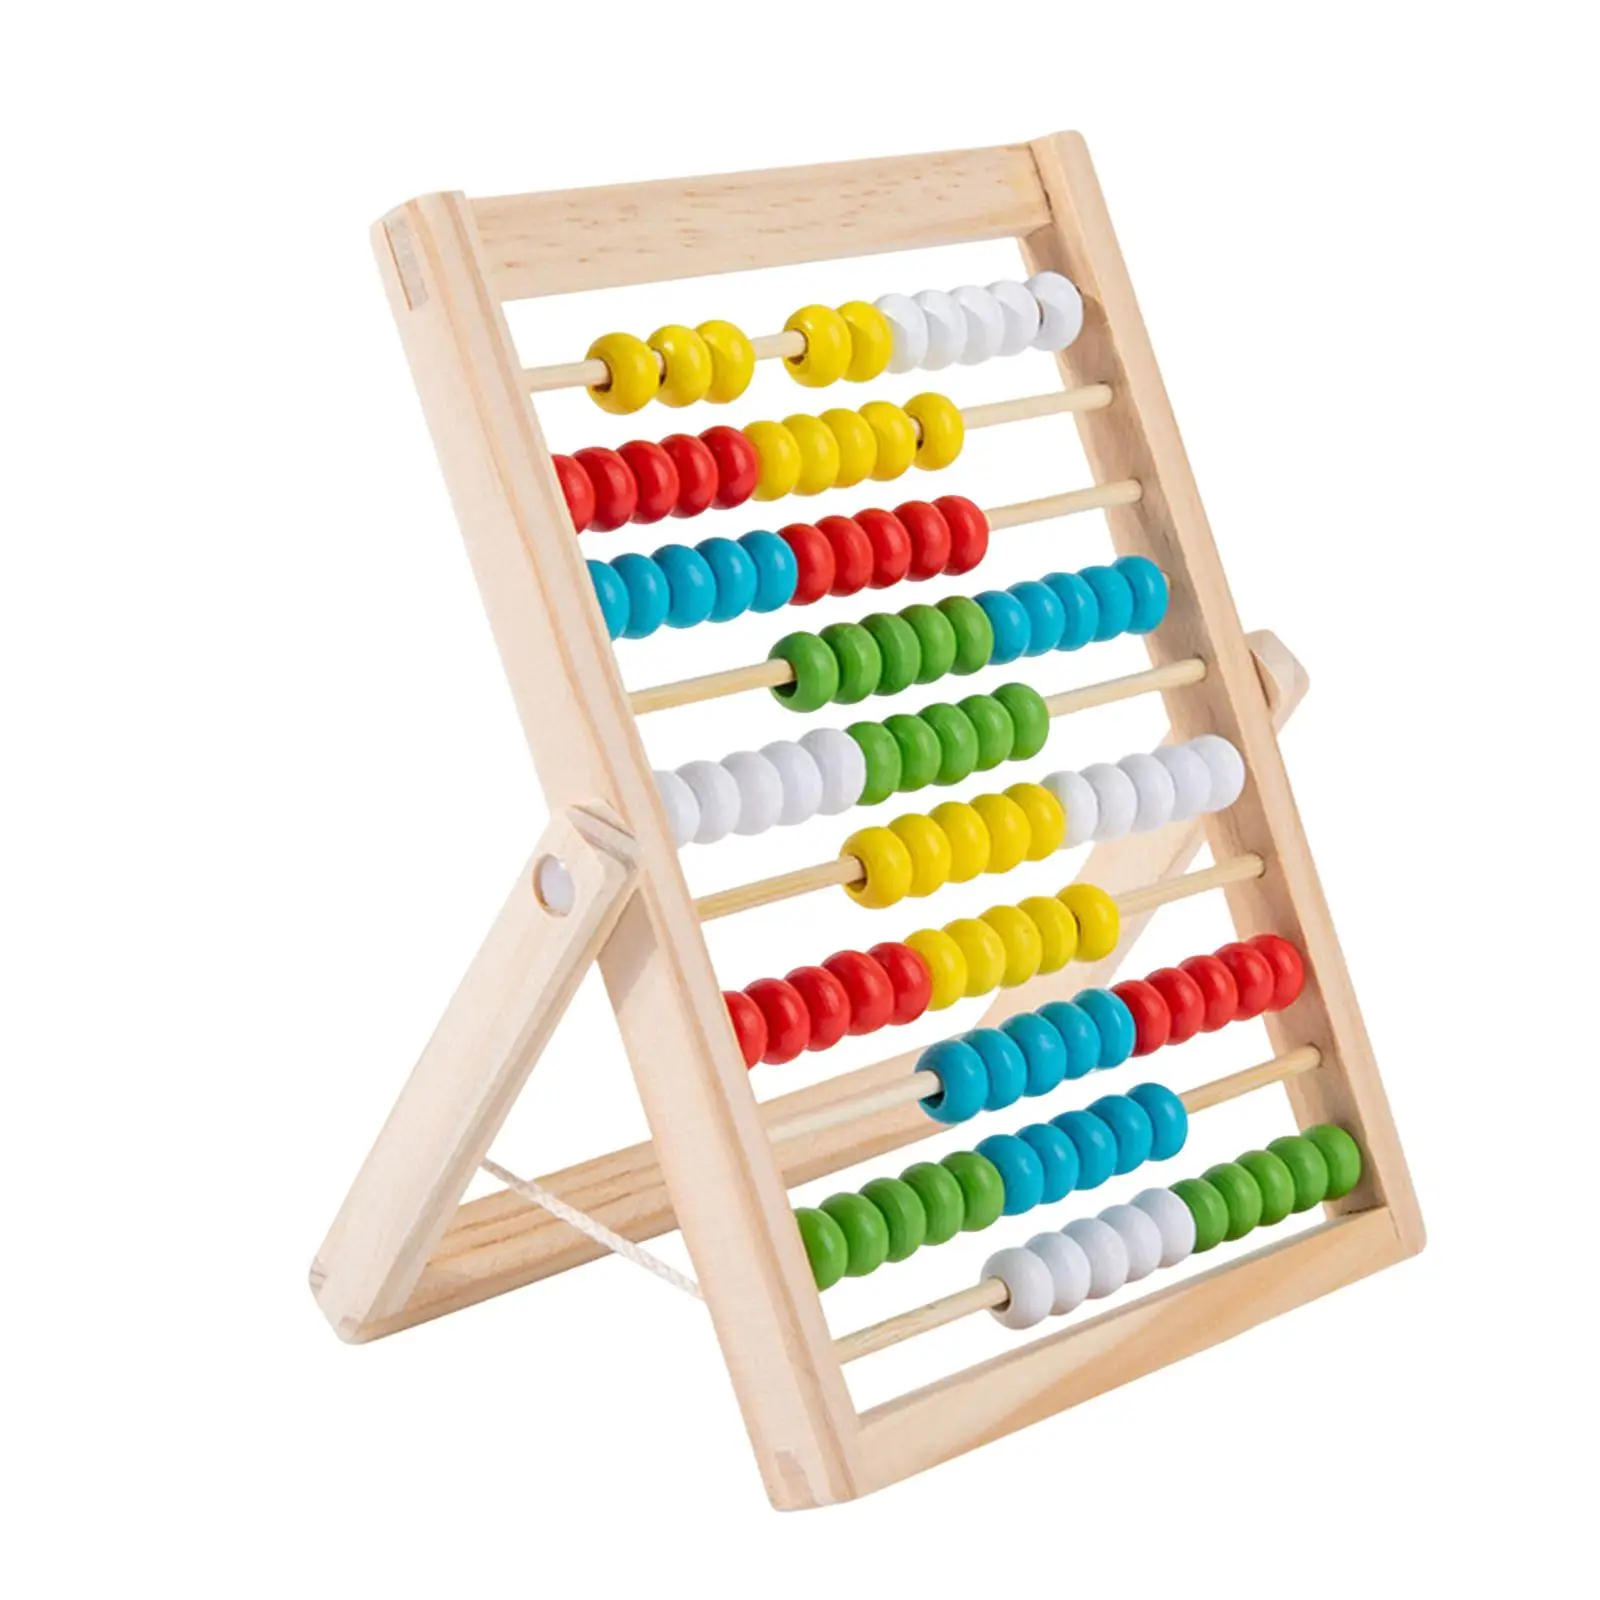 

Wooden Abacus Classic Counting Tool 100 Beads Math Tool Addition and Subtraction 10 Rows Abacus for Preschool Children Toddlers